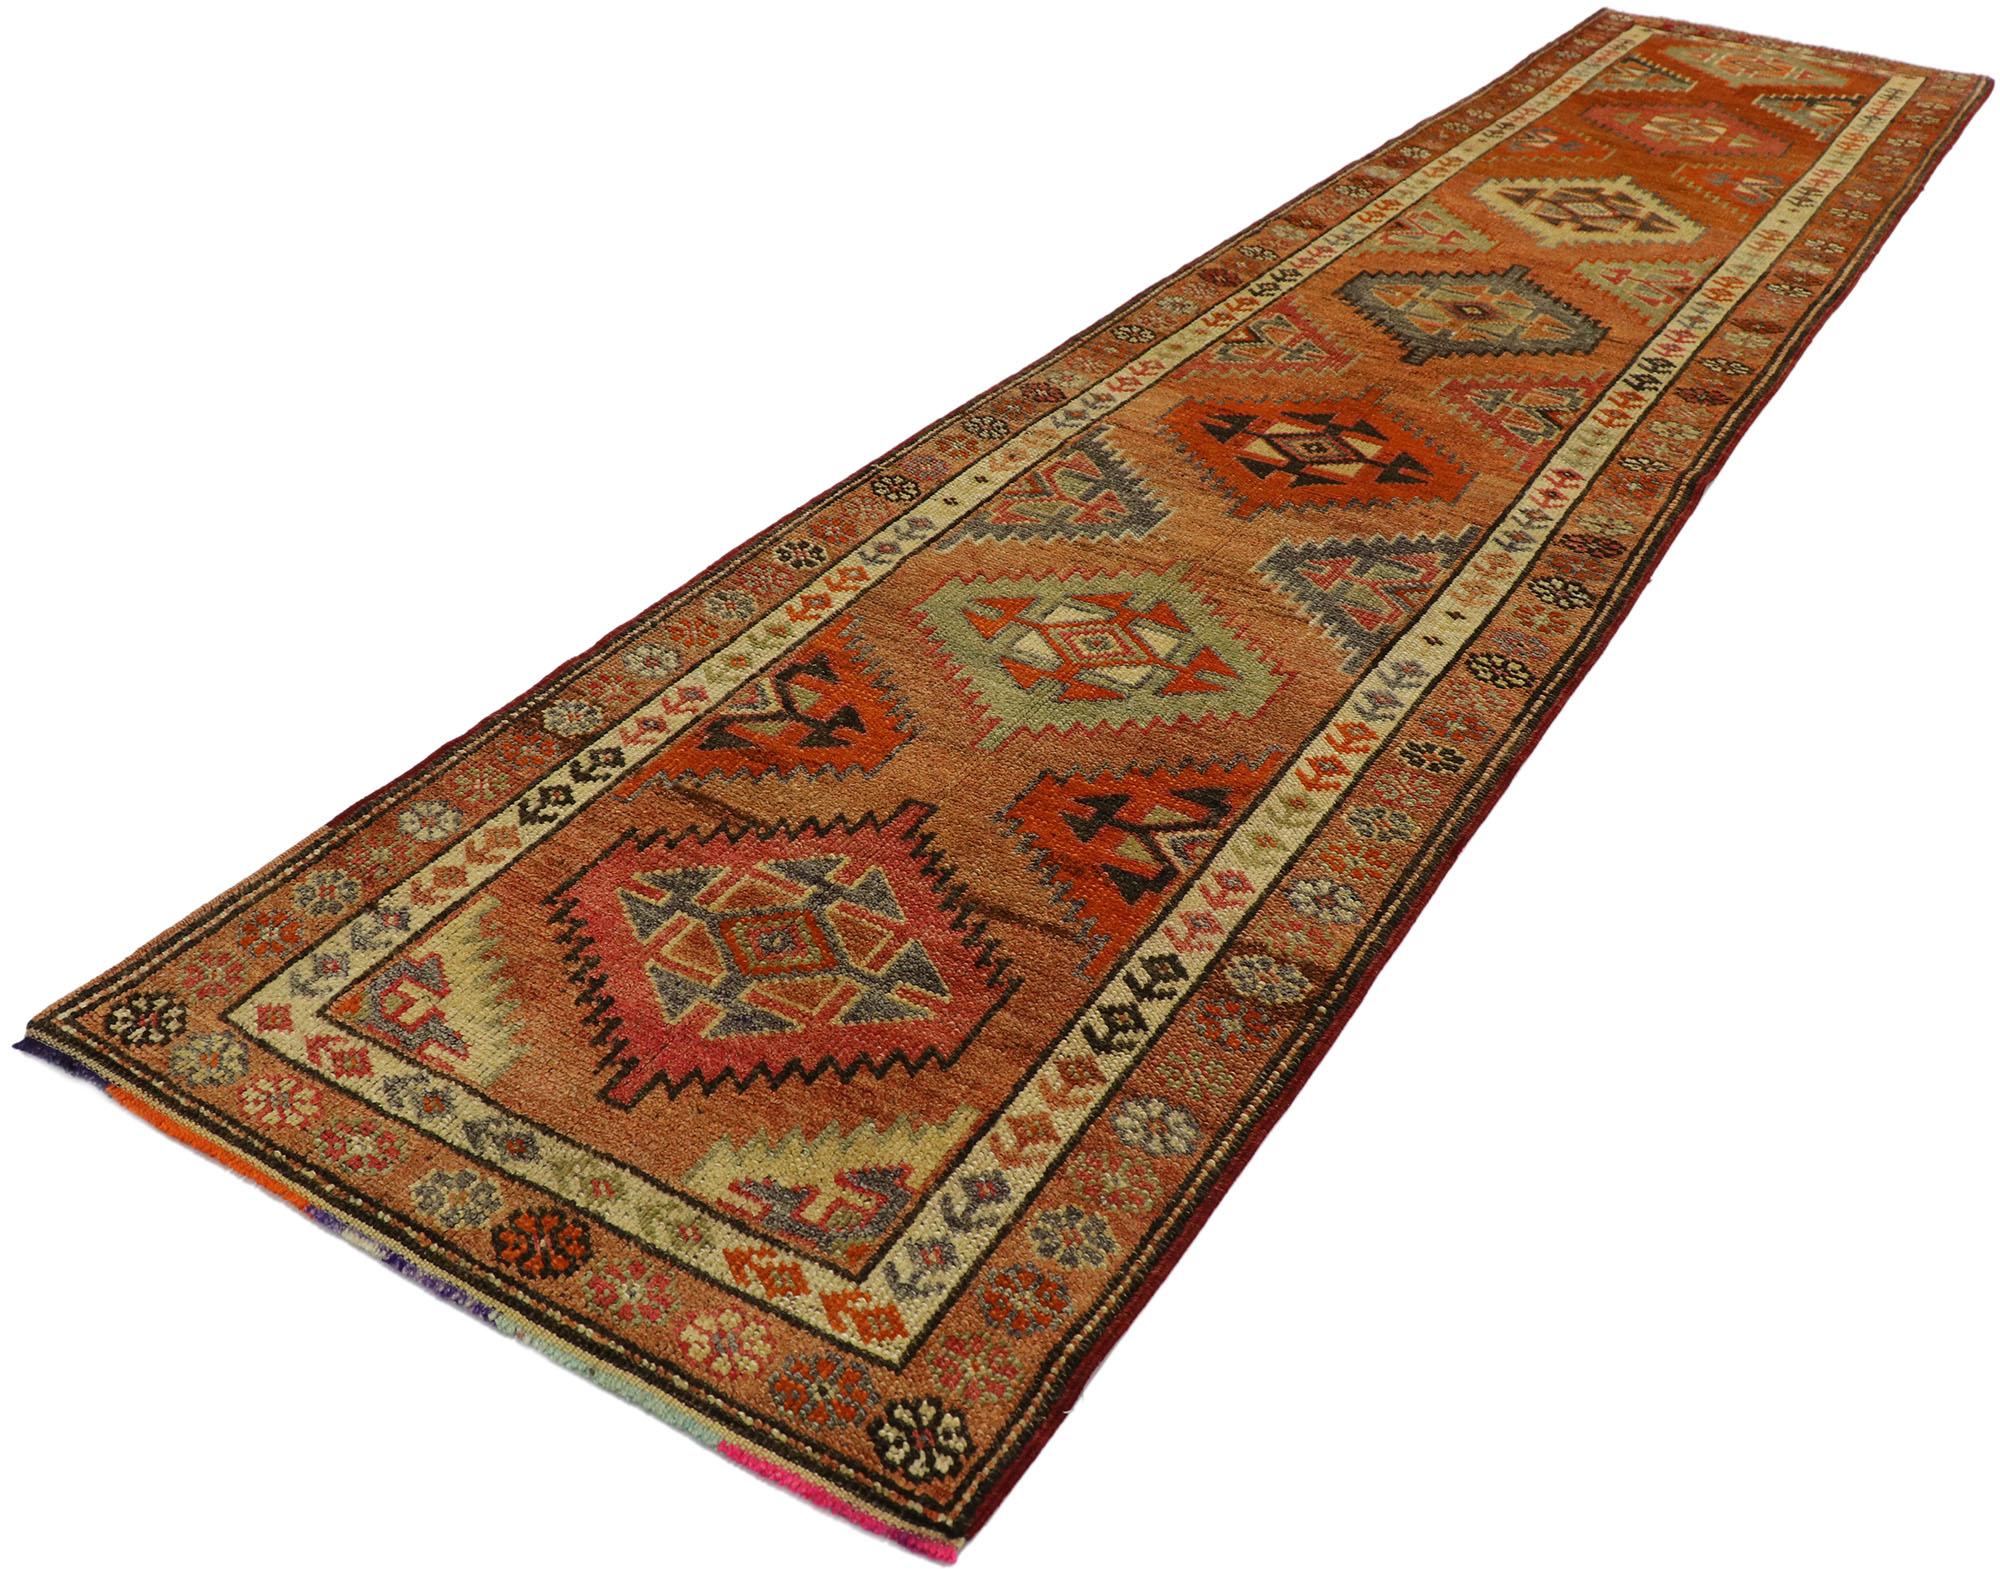 53226, vintage Turkish Oushak runner with warm Santa Fe desert tribal style. With vibrant hues and warm earth-tones combined with a bold geometric form, this hand knotted wool vintage Turkish Oushak runner manages to beautifully meld with modern,